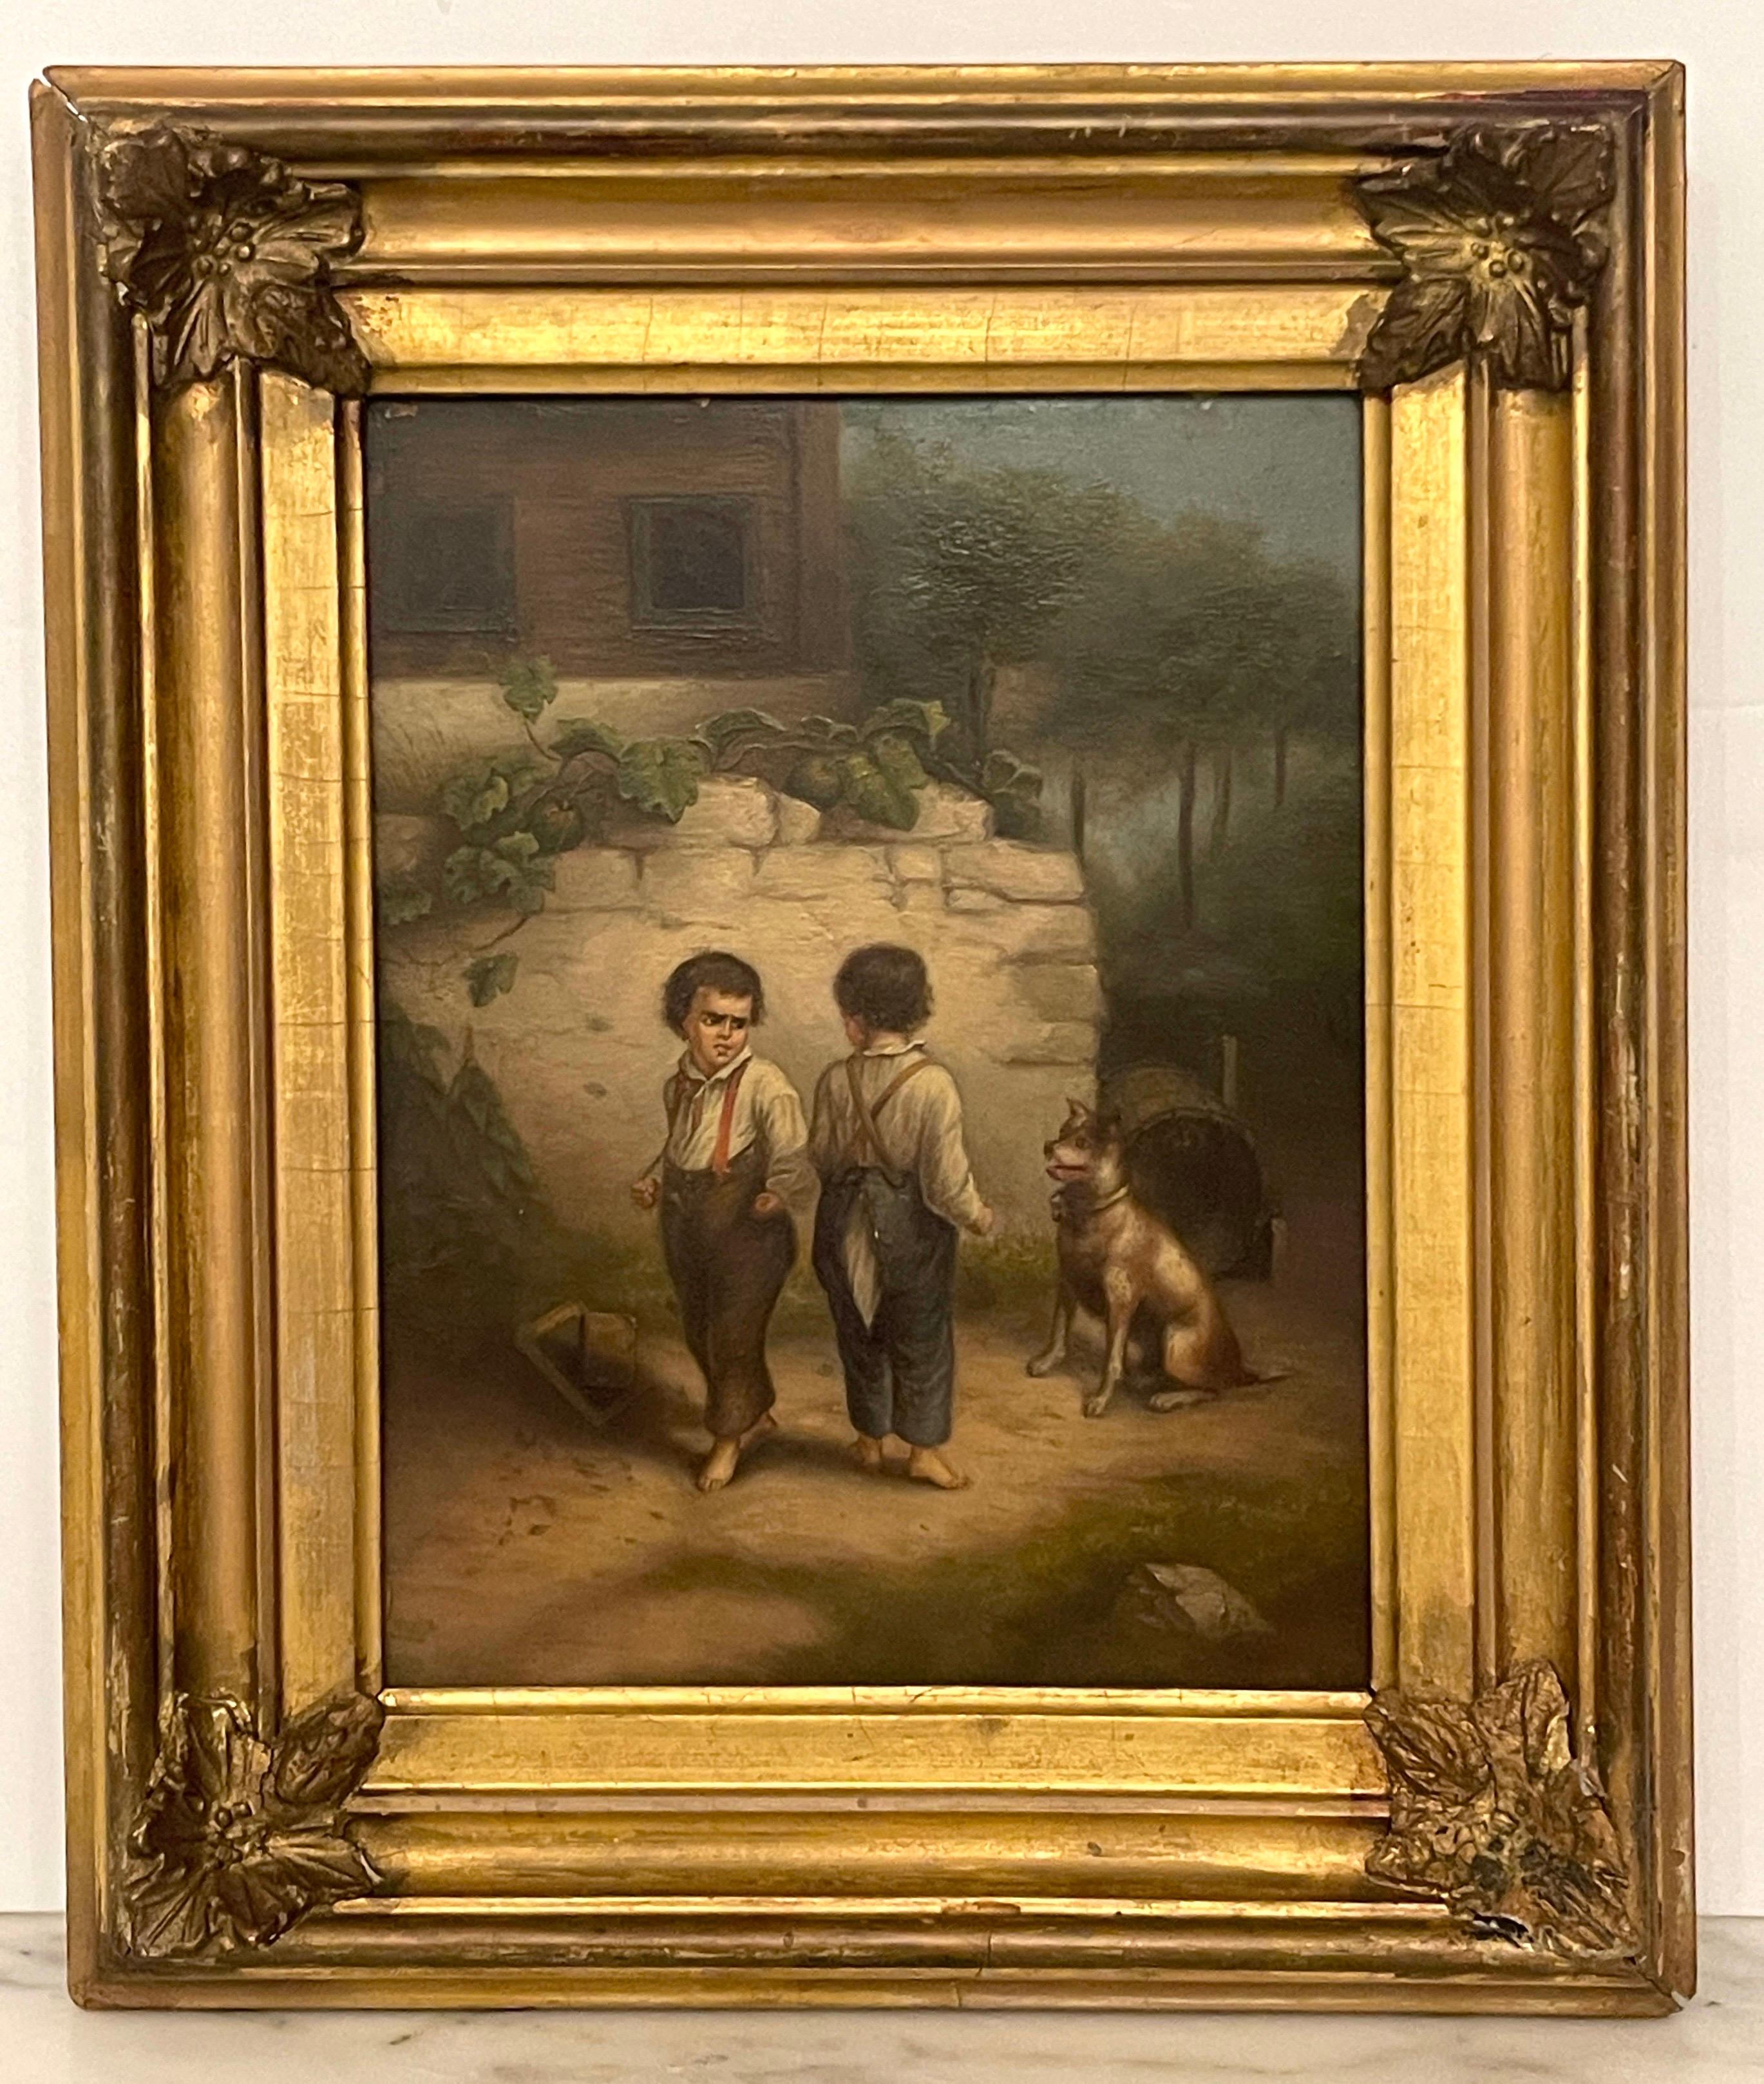 19th century French Painting 'Backyard Fight', Unsigned 
France, later 19th century 
Oil on Board, Apparently unsigned.

This 19th-century French painting, titled 'Backyard Fight,' is a delightful example of genre painting from the later 19th